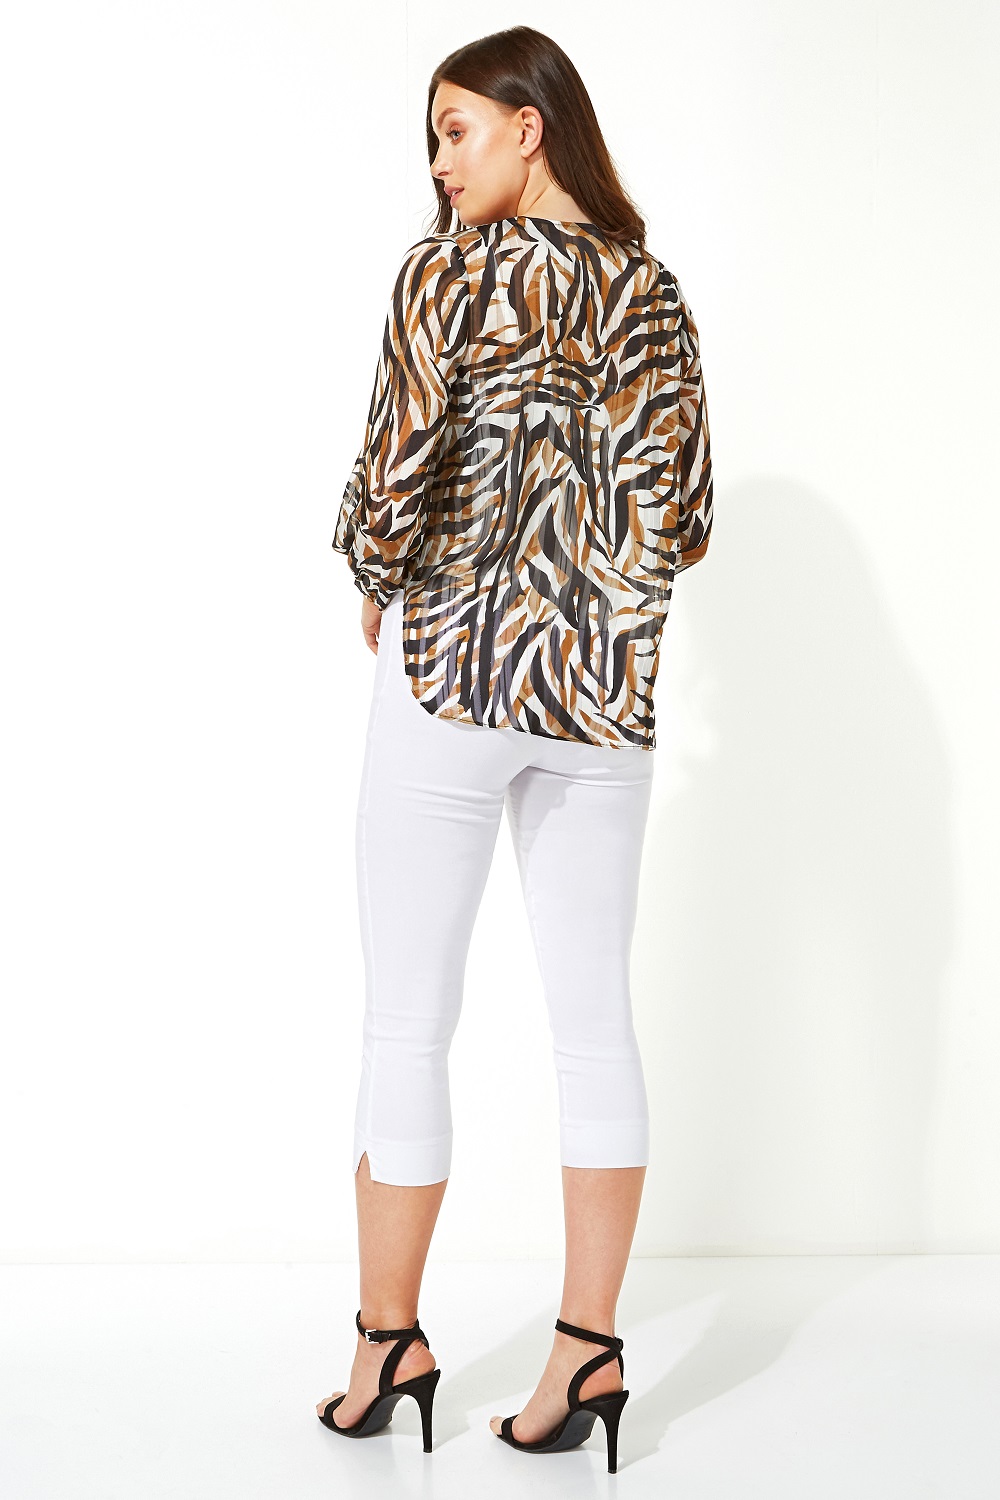 Brown Animal Print Tie Front Blouse, Image 3 of 4